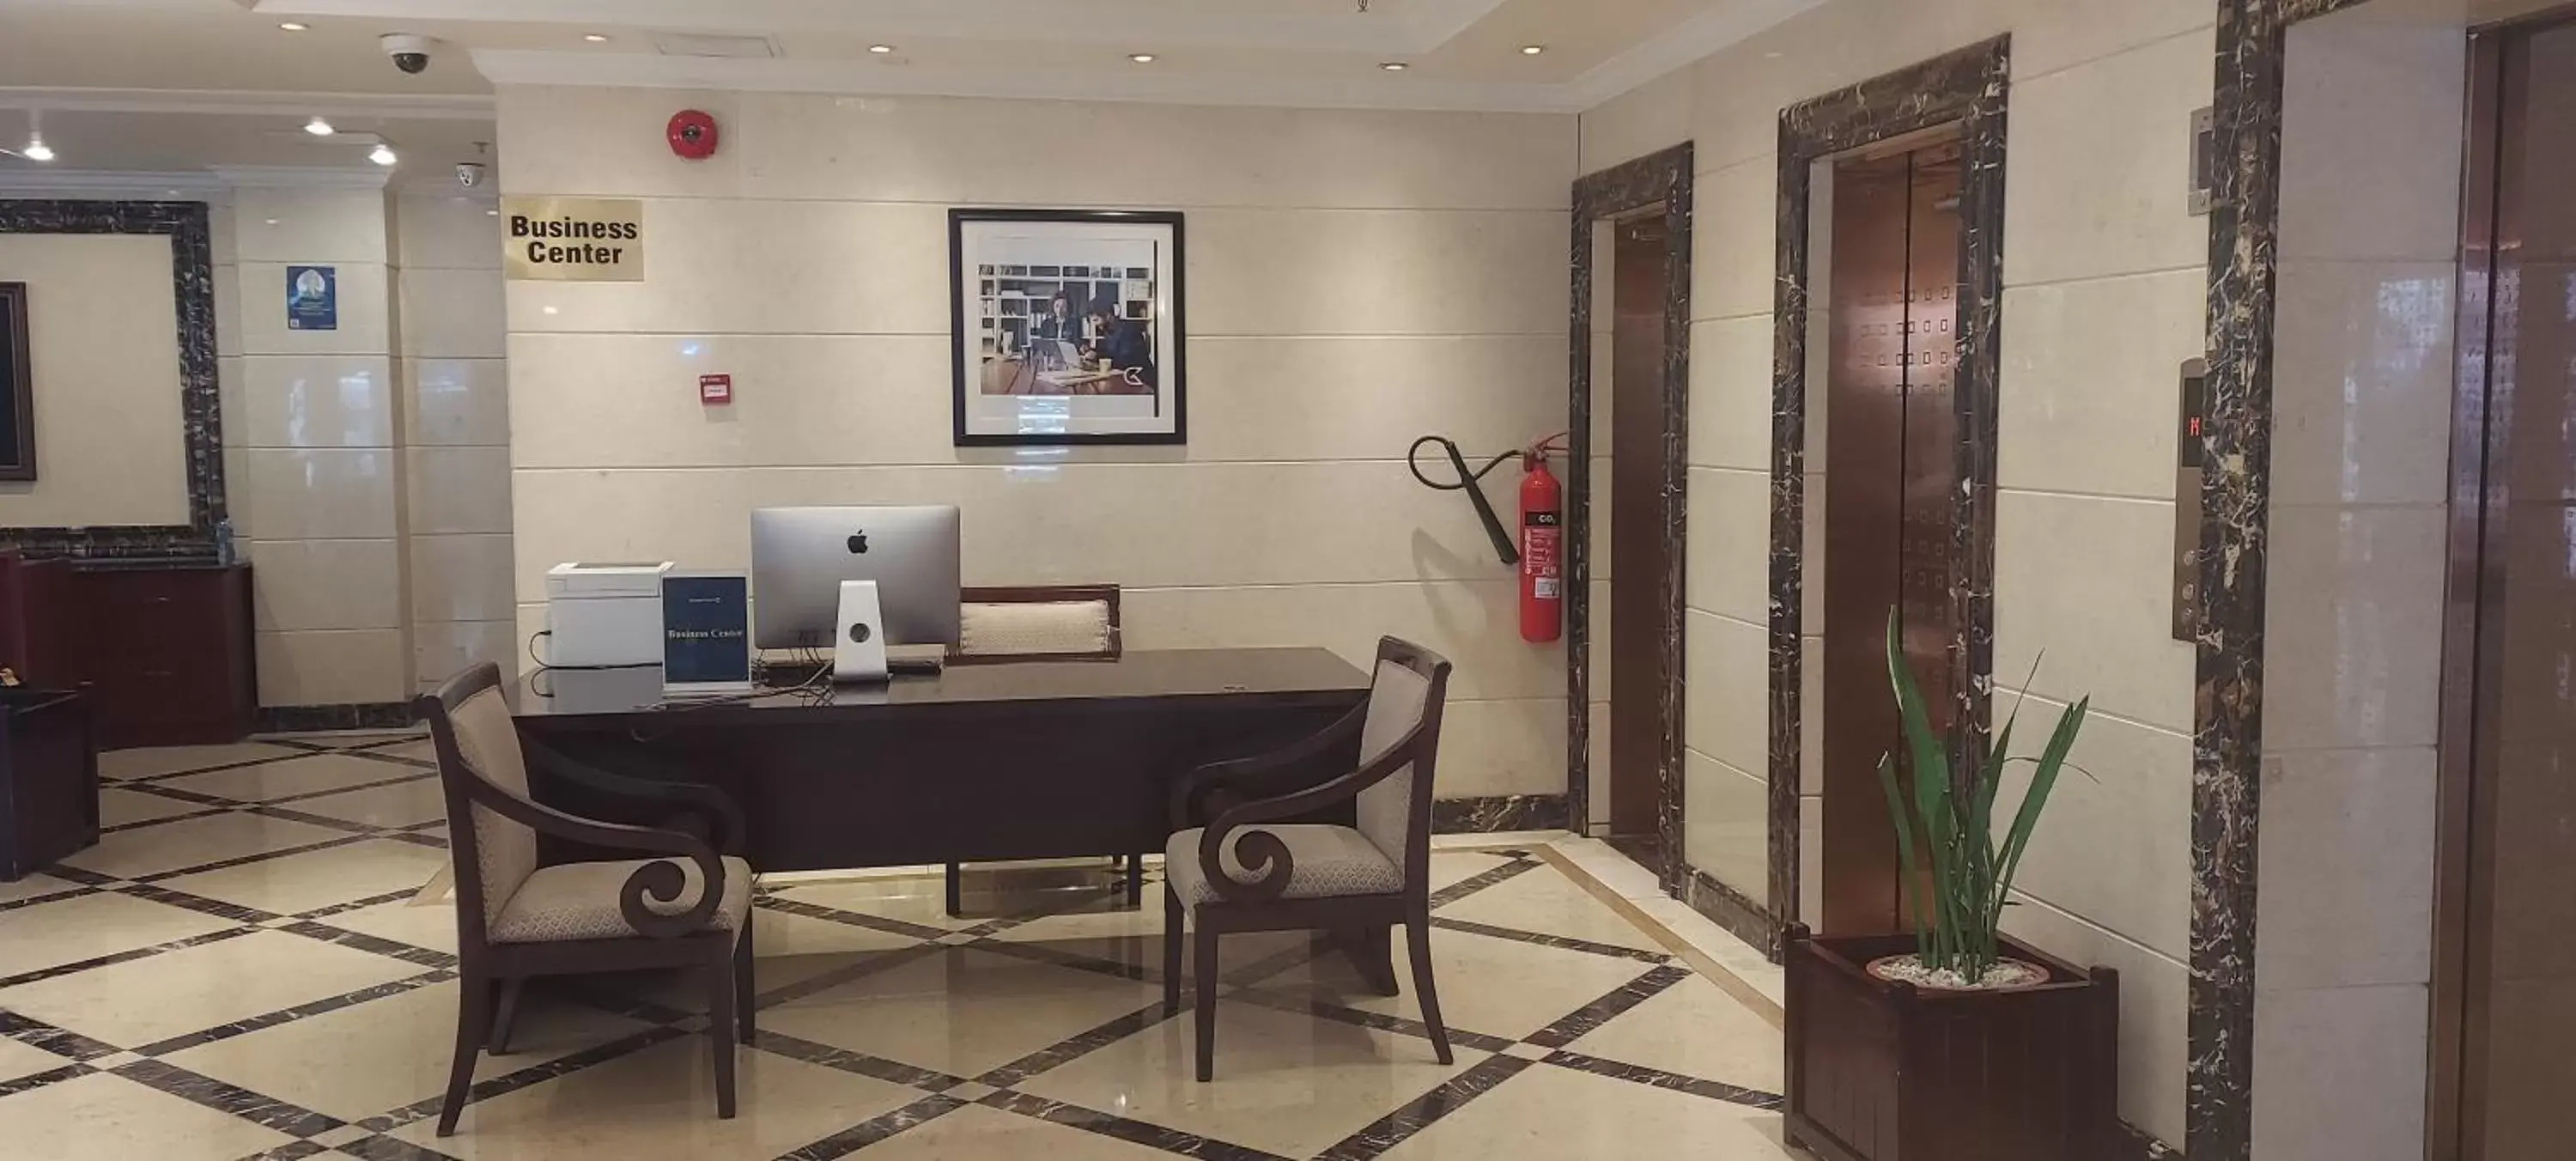 Business facilities in Golden Tulip Addis Ababa